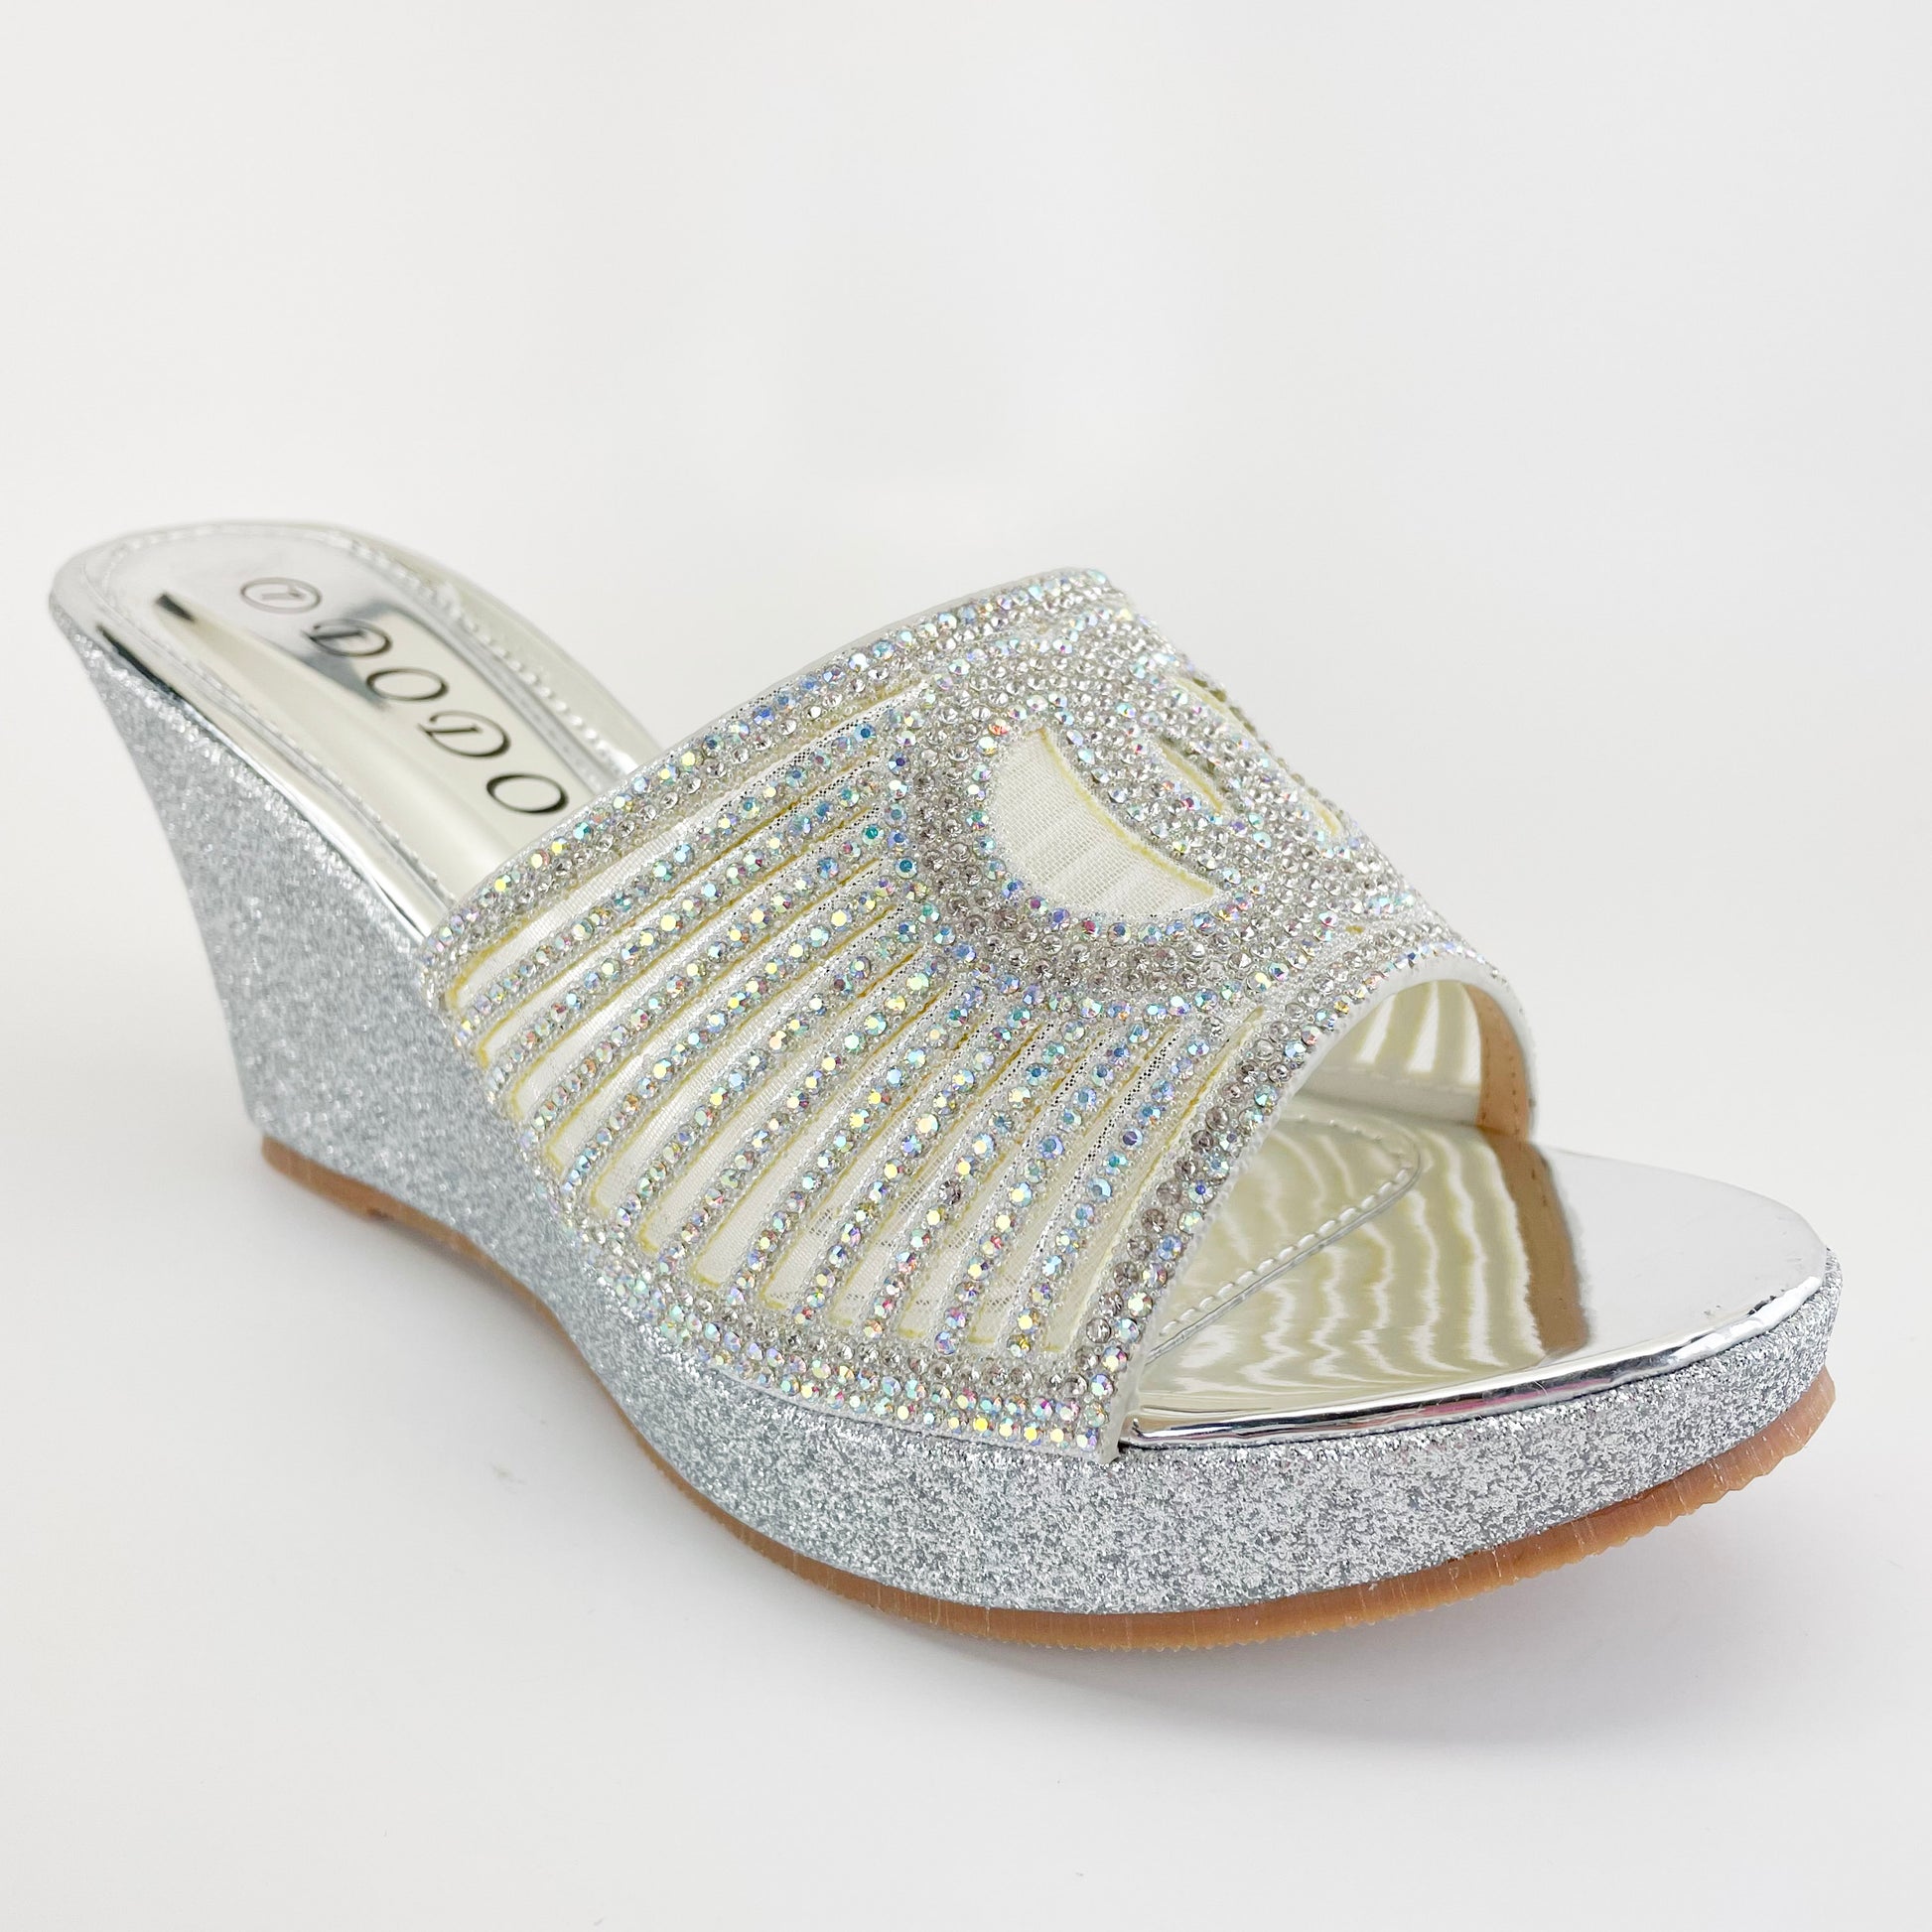 dodo w123-80 silver party wedges with rhinestones for women